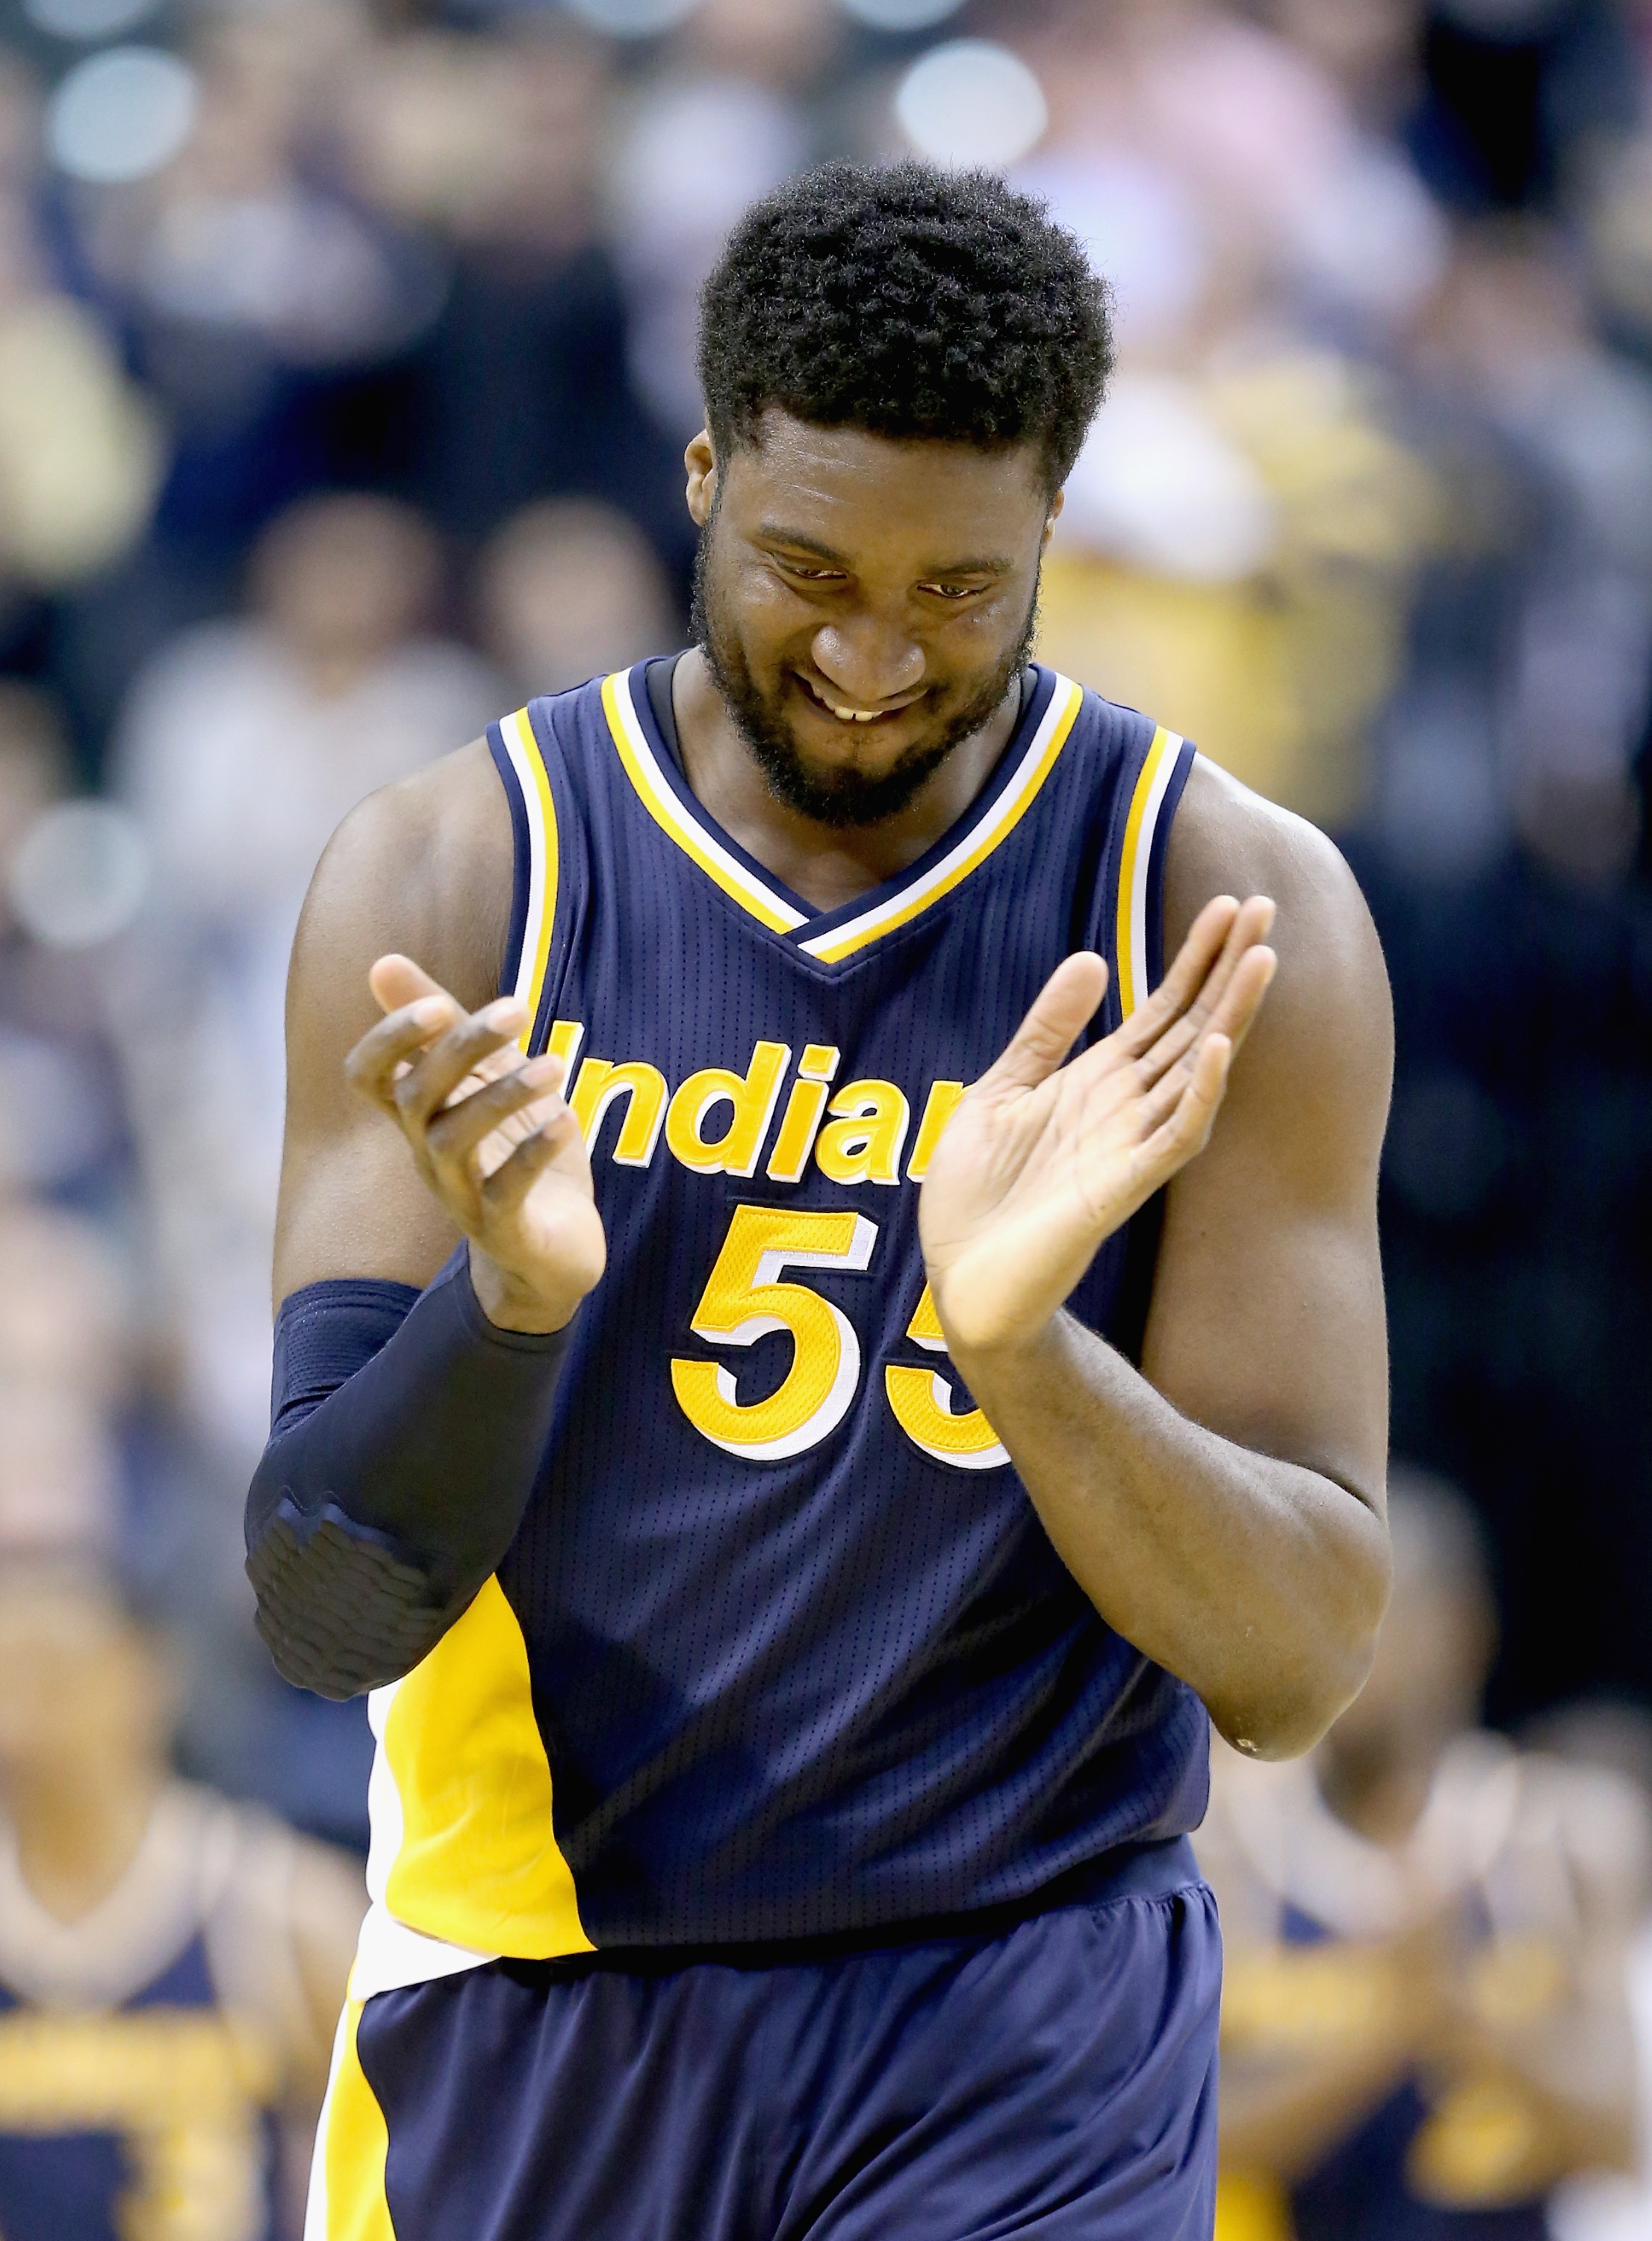 INDIANAPOLIS, IN - FEBRUARY 27:  Roy Hibbert #55 of the Indiana Pacers celebrates during the game against the Cleveland Cavaliers on February 27, 2015 in Indianapolis, Indiana.   NOTE TO USER: User expressly acknowledges and agrees that, by downloading and or using this Photograph, user is consenting to the terms and conditions of the Getty Images License Agreement.  (Photo by Andy Lyons/Getty Images)